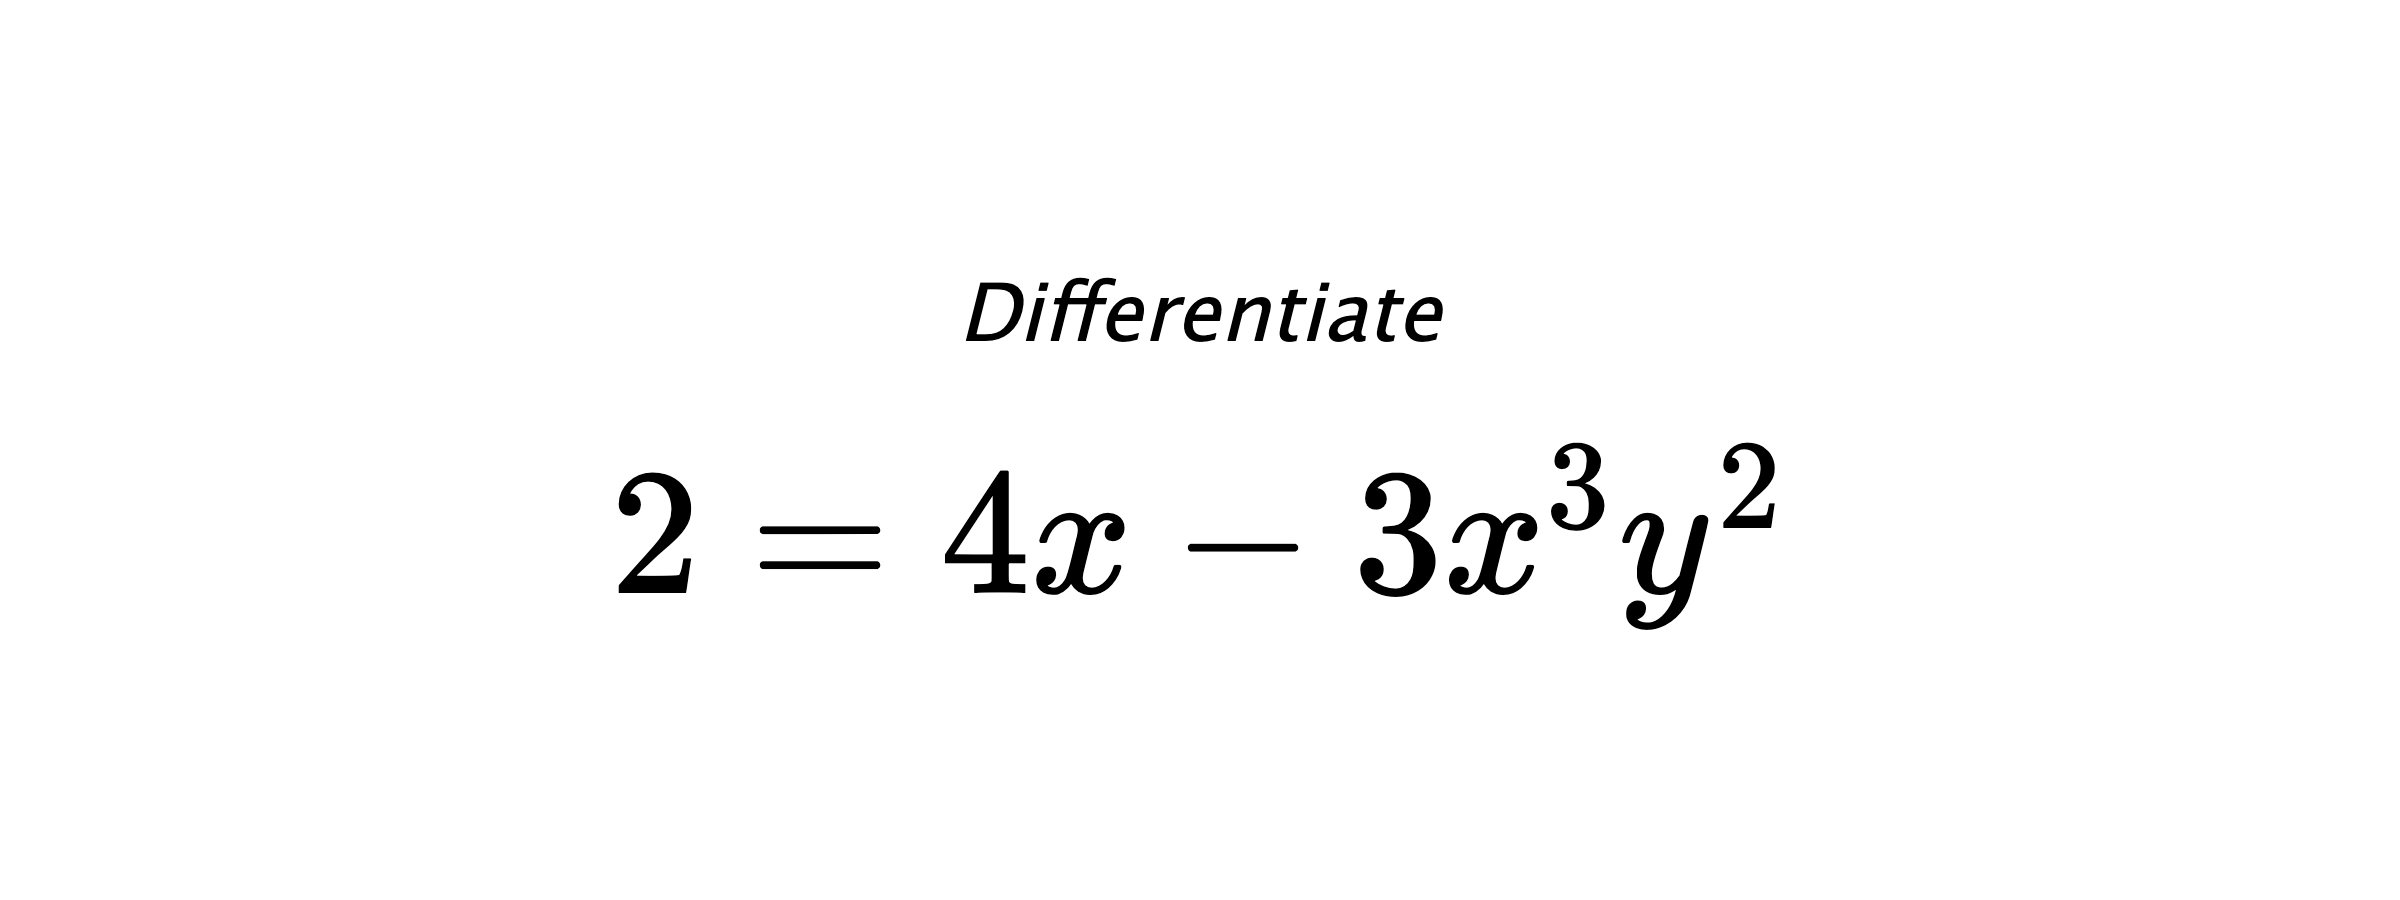 Differentiate $ 2 = 4x-3x^3y^2 $